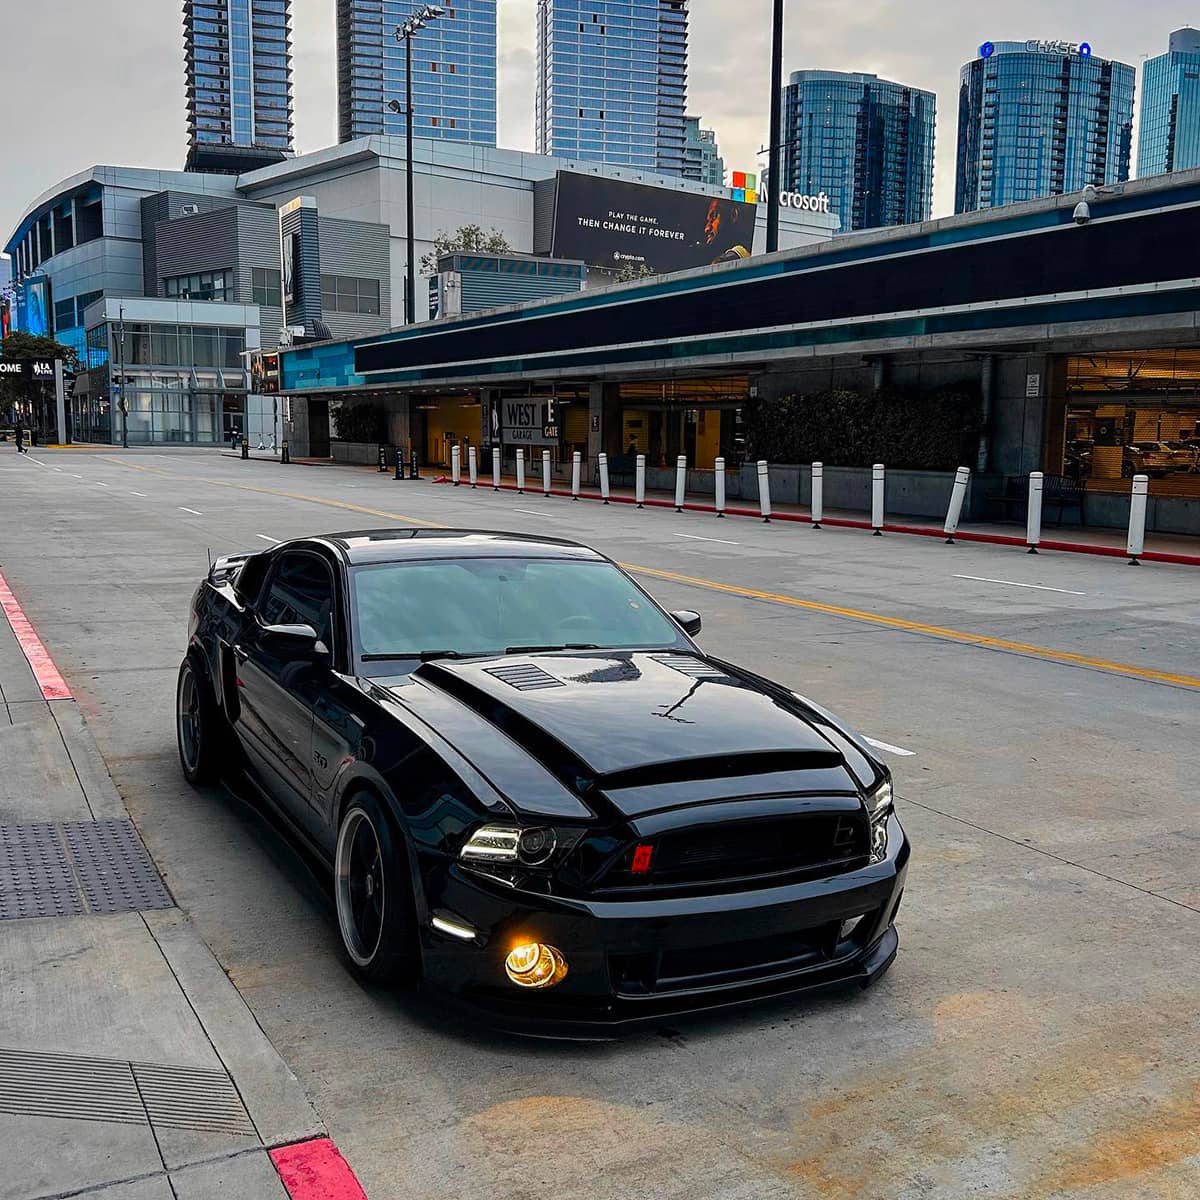 Blacked out 2013 Ford Mustang Shelby GT500 Super Snake replica